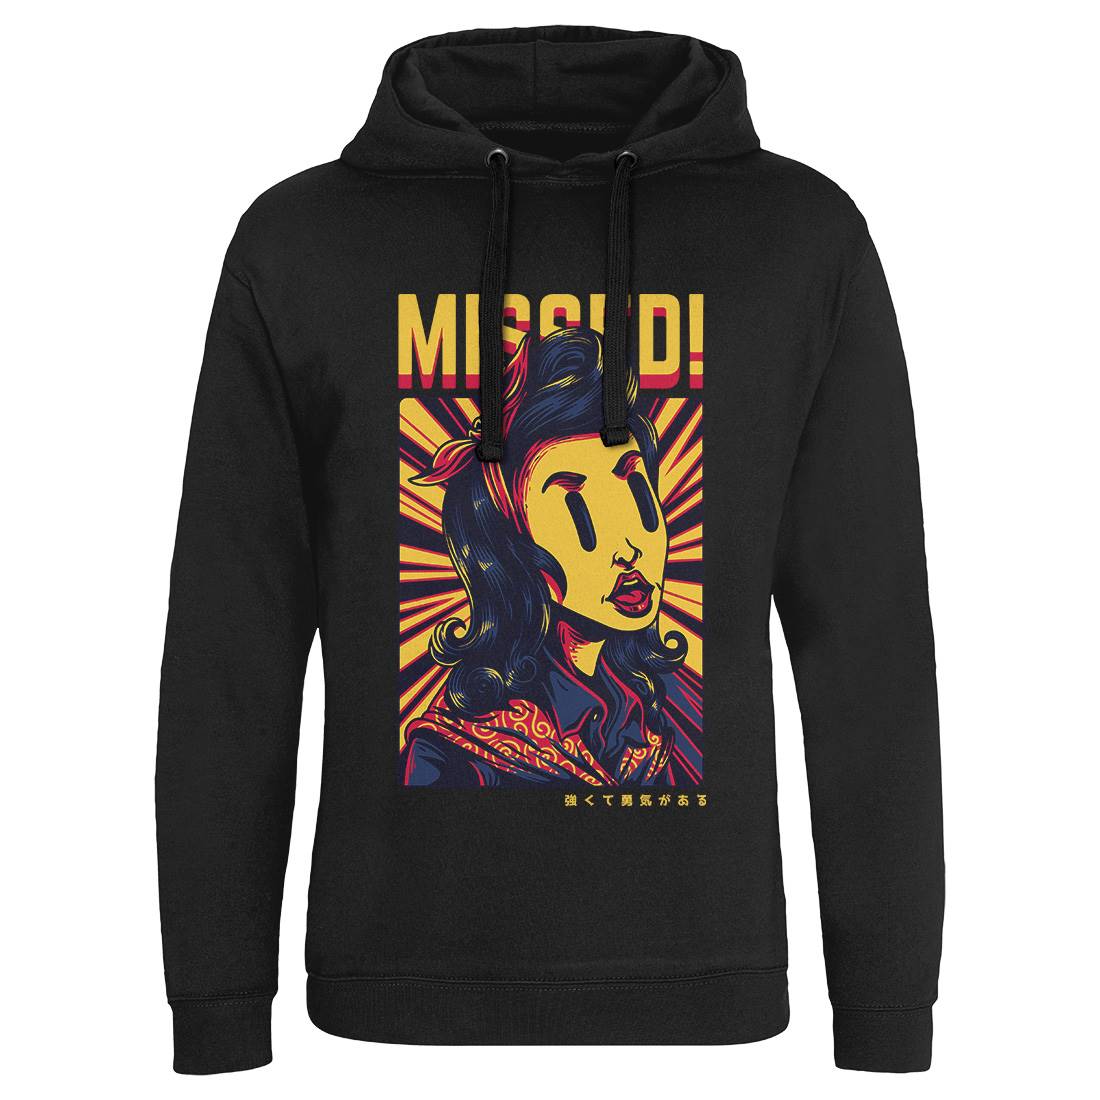 Missed Girl Mens Hoodie Without Pocket Retro D654